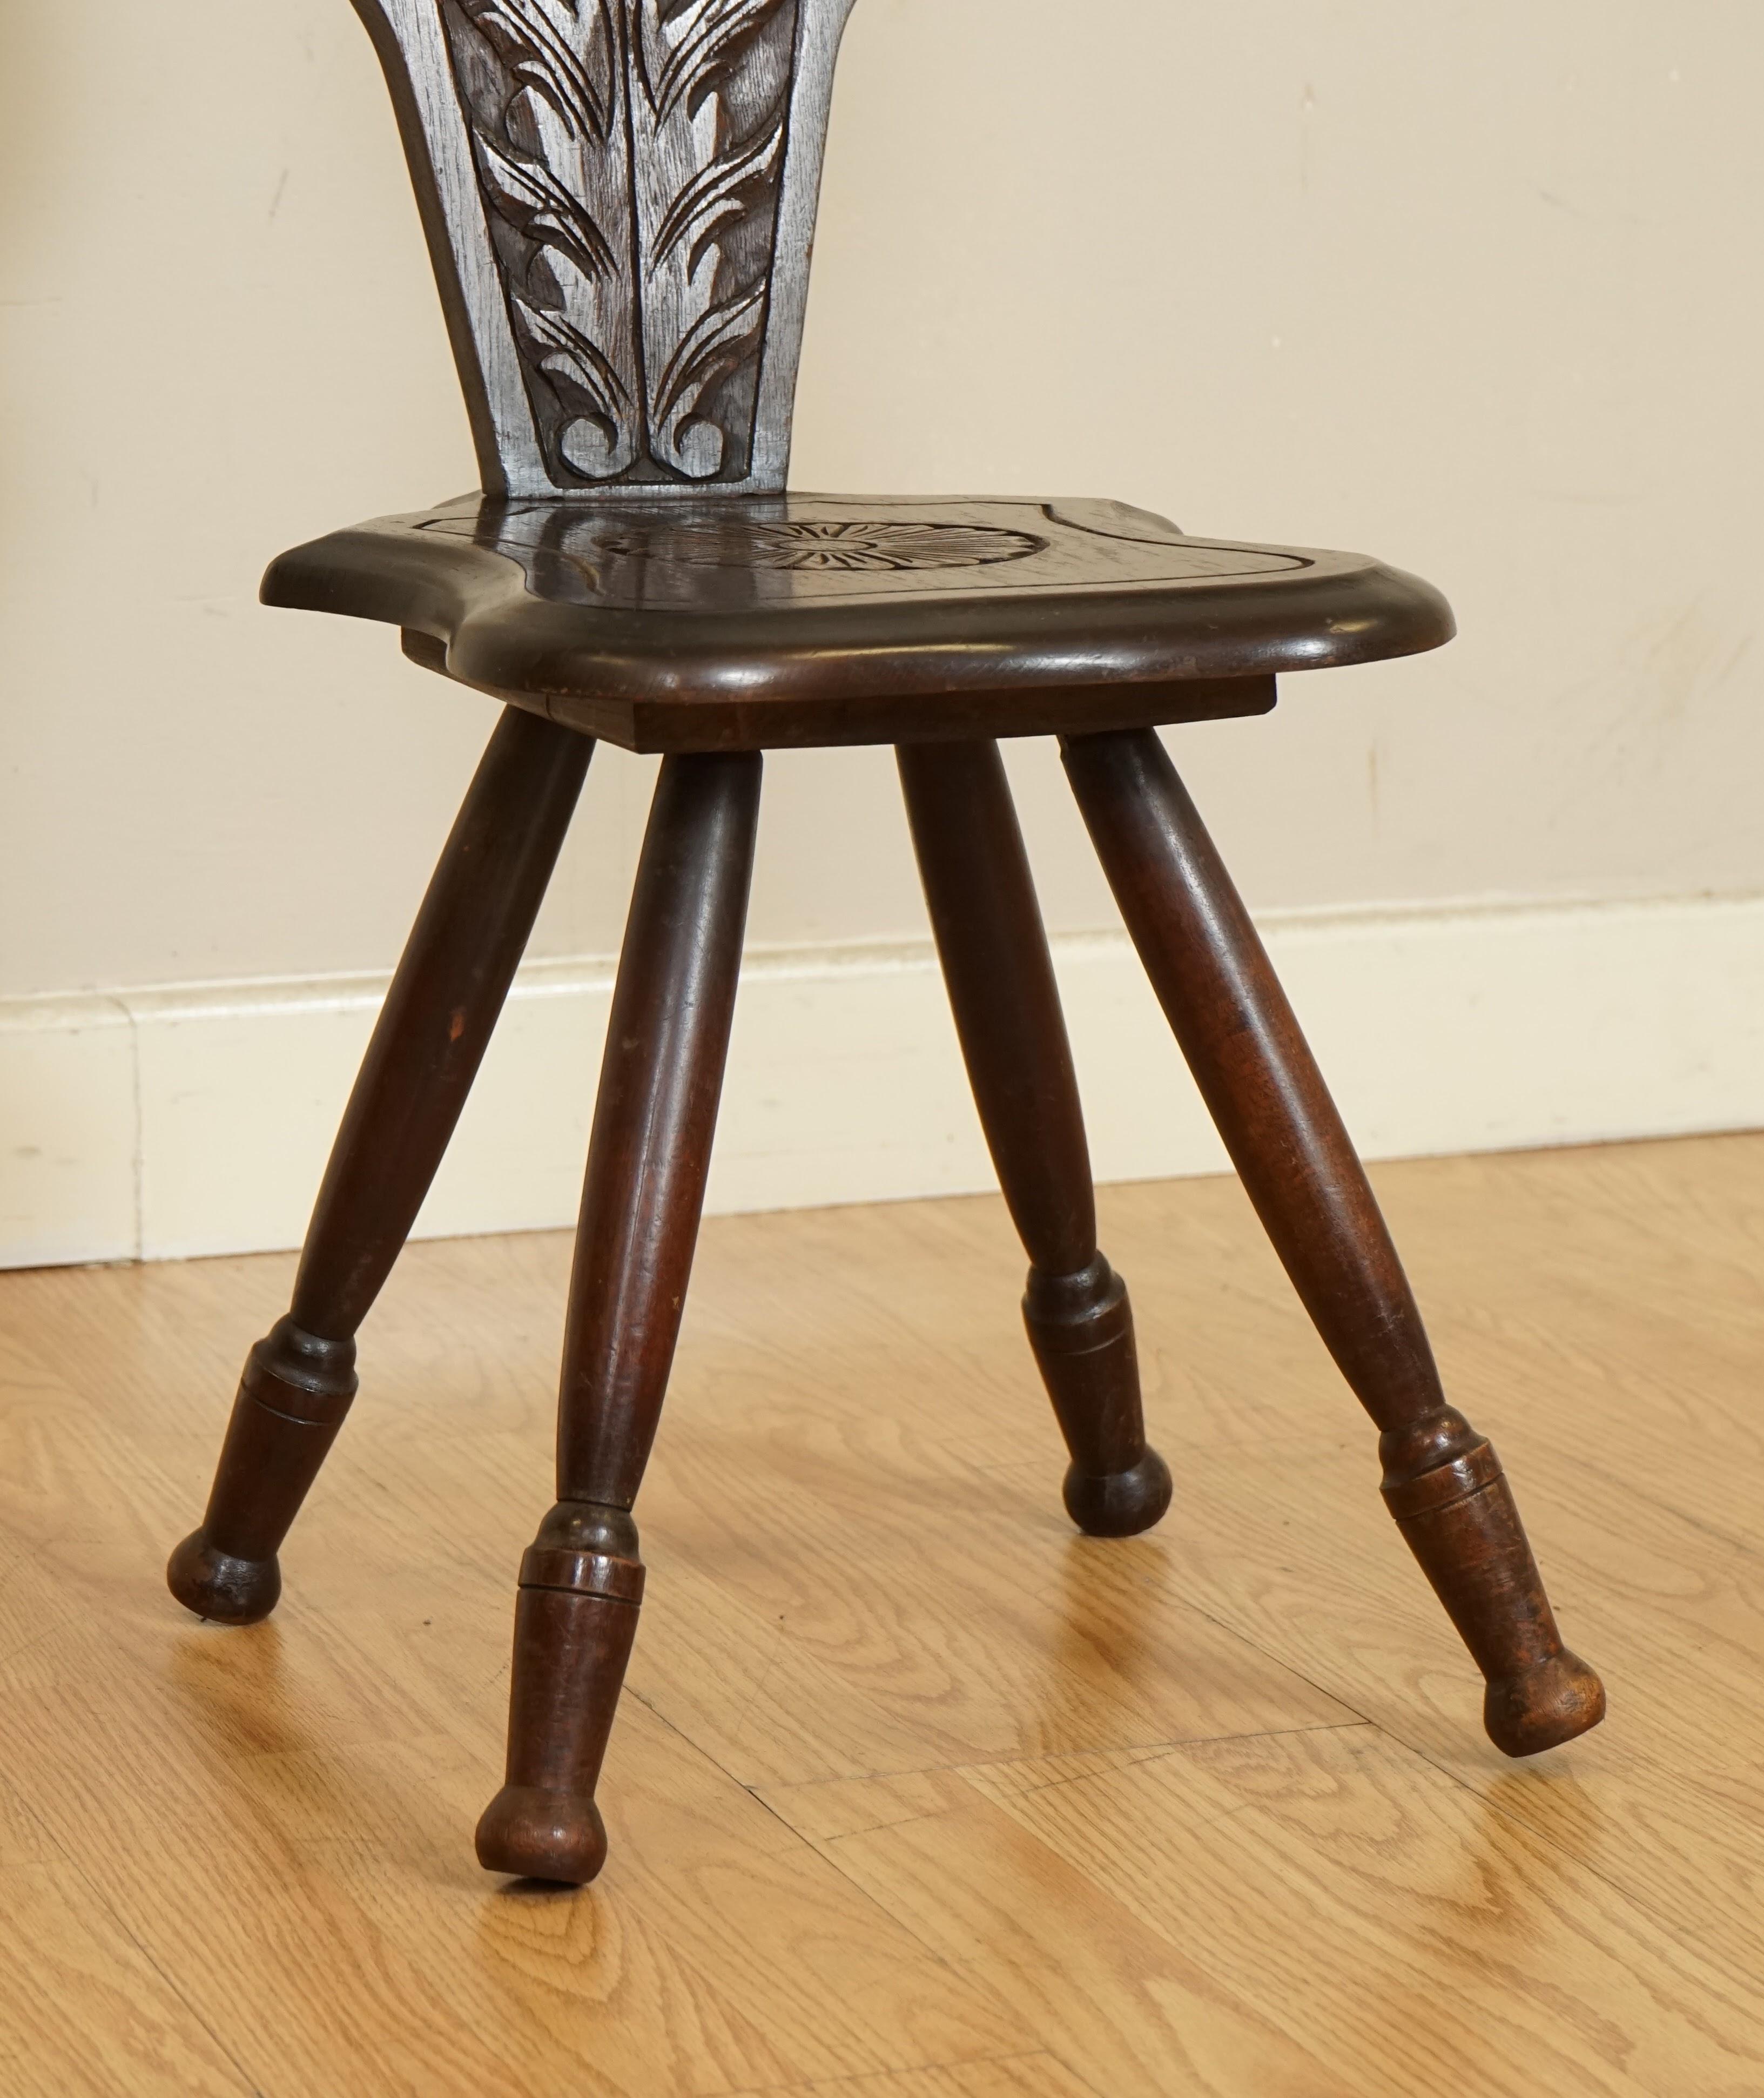 Welsh Very Decorative Antique Welish Spinning Side Chair Stool